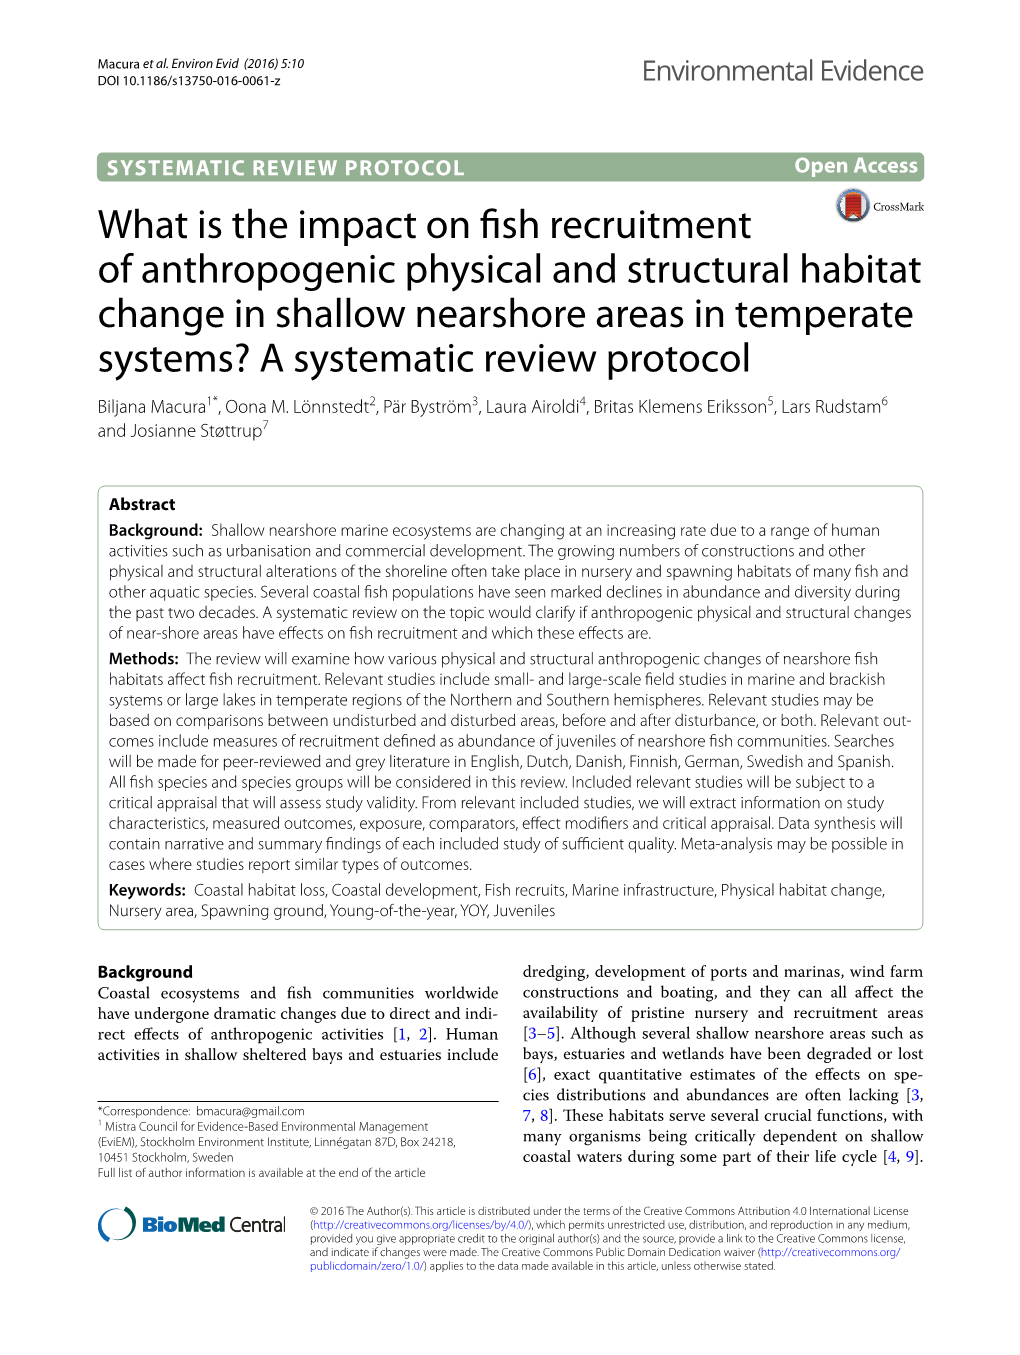 What Is the Impact on Fish Recruitment of Anthropogenic Physical and Structural Habitat Change in Shallow Nearshore Areas In